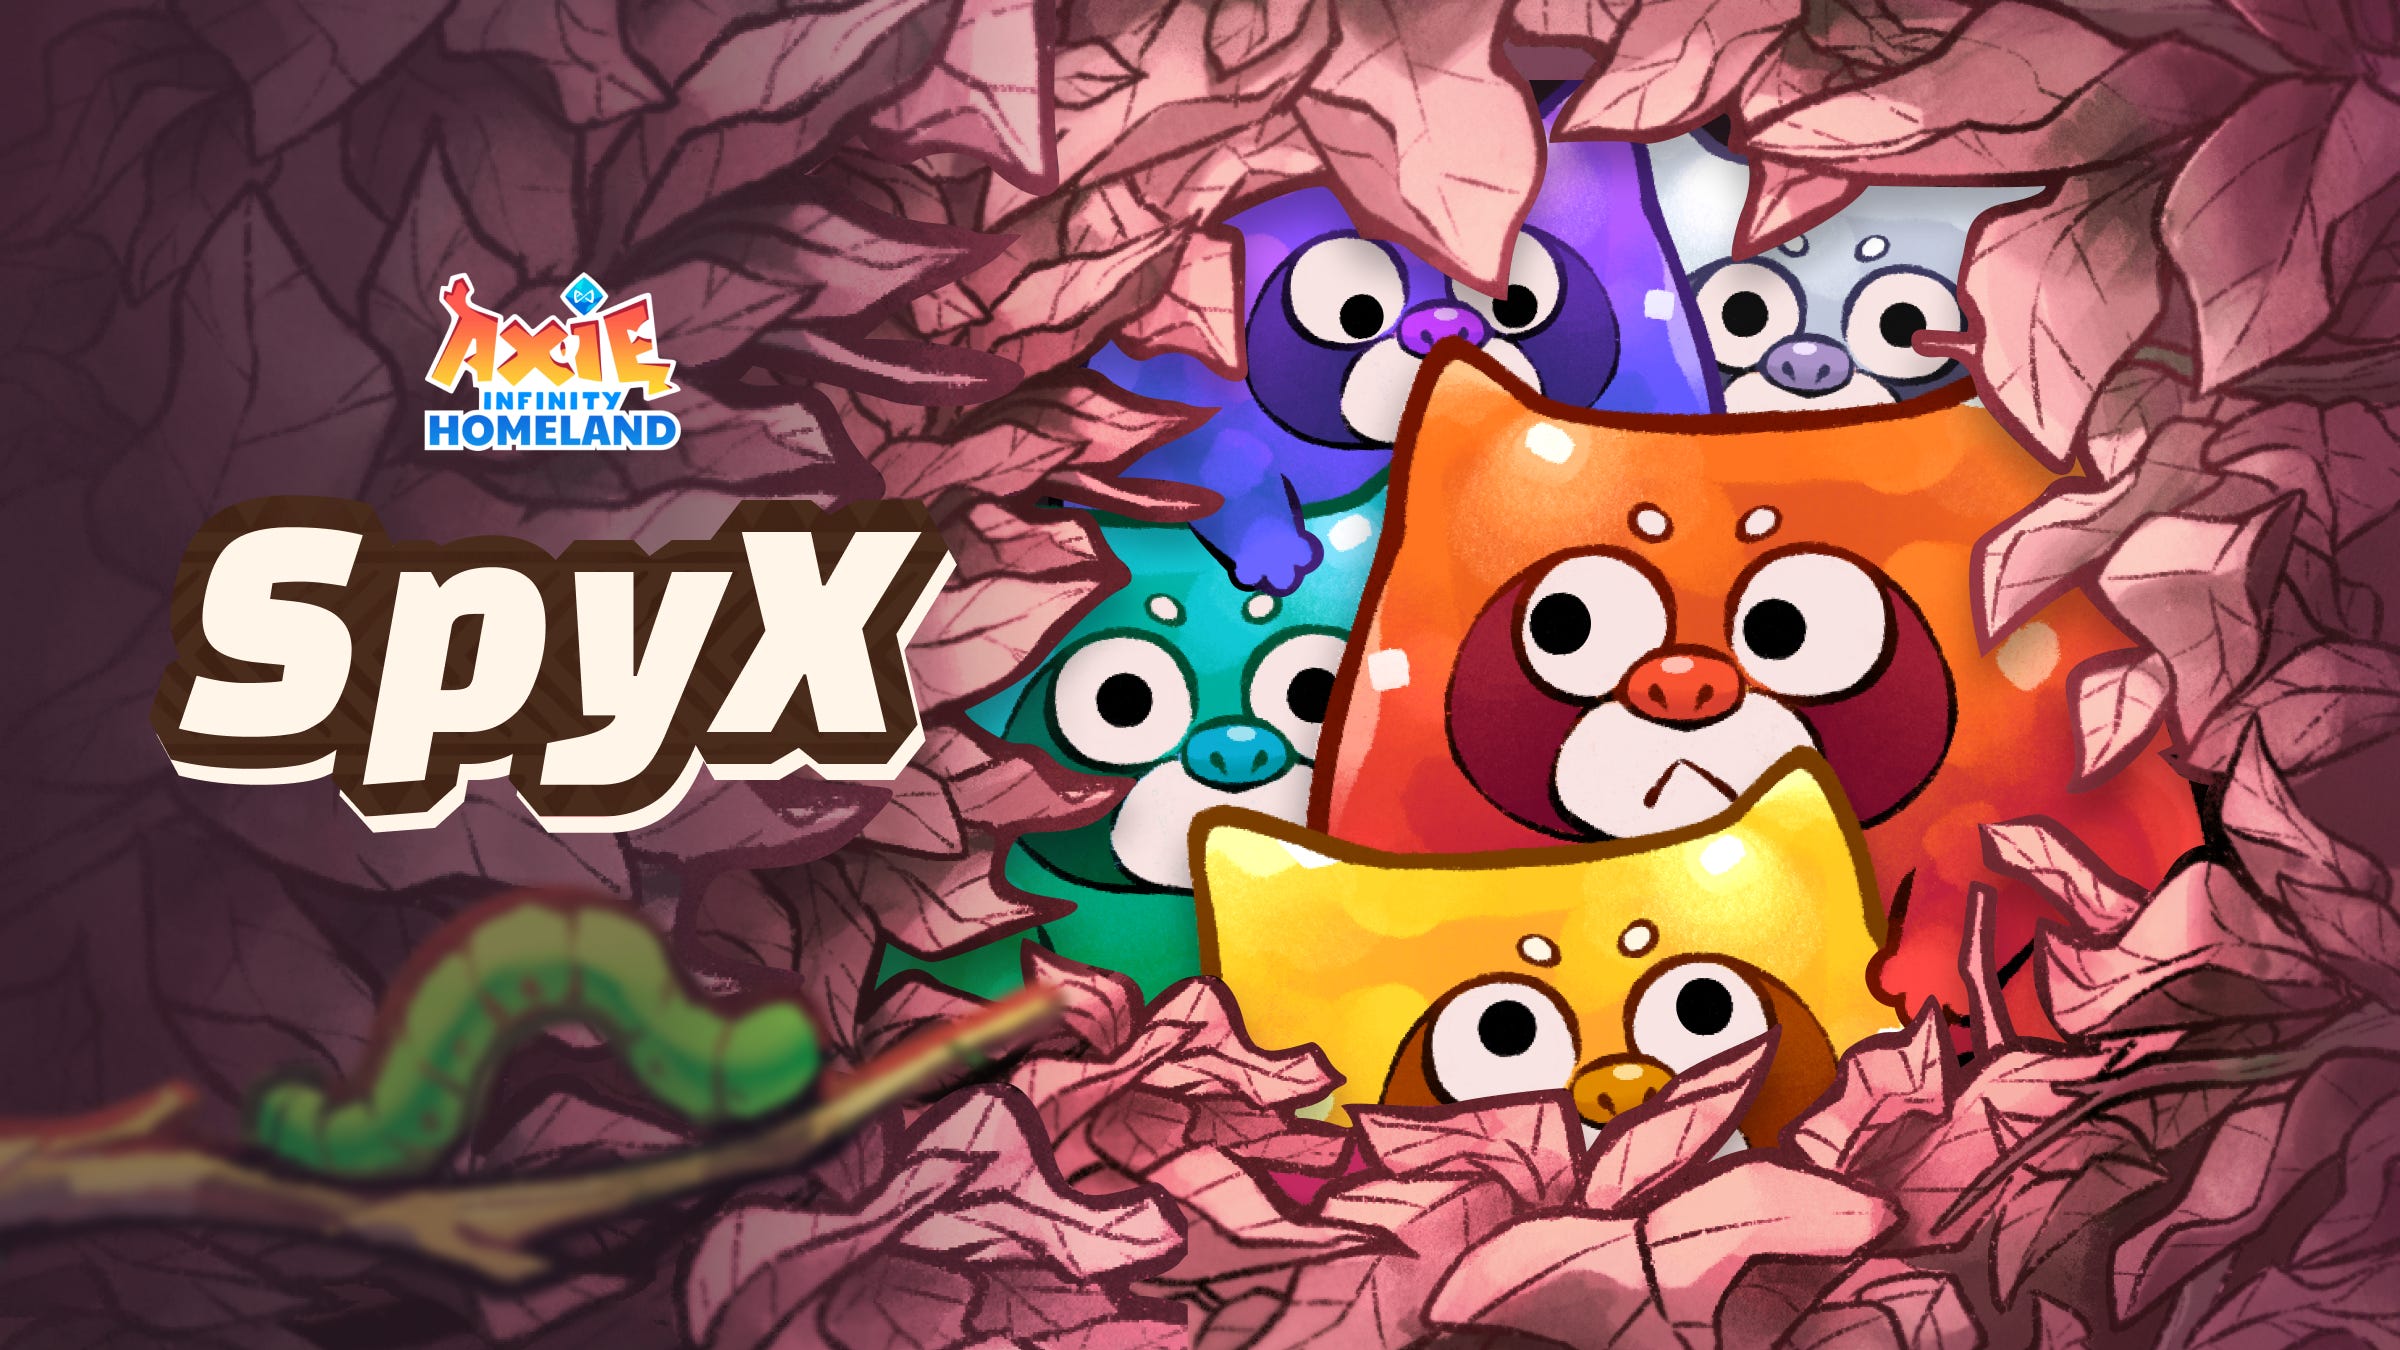 Axie Infinity on X: 4/ Compete on two Leaderboards: Passive Adventure and  Land Development. The top 500 players in each of these Leaderboards will  receive AXS rewards according to the schedule below.